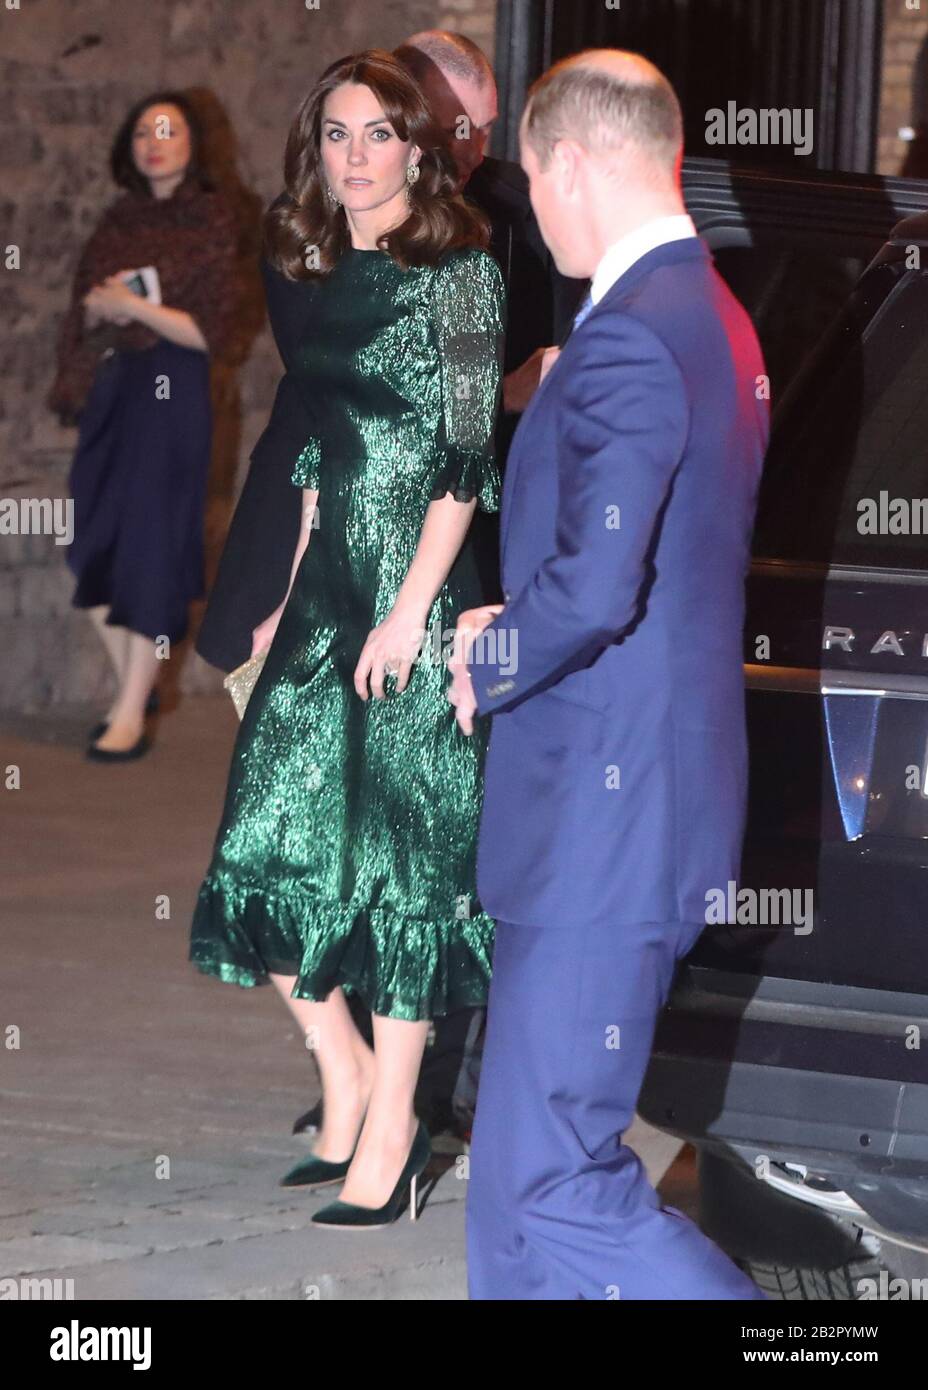 The Duke and Duchess of Cambridge at a reception hosted by the British Ambassador to Ireland at the Gravity Bar, Guinness Storehouse, Dublin, during their three day visit to the Republic of Ireland. Stock Photo